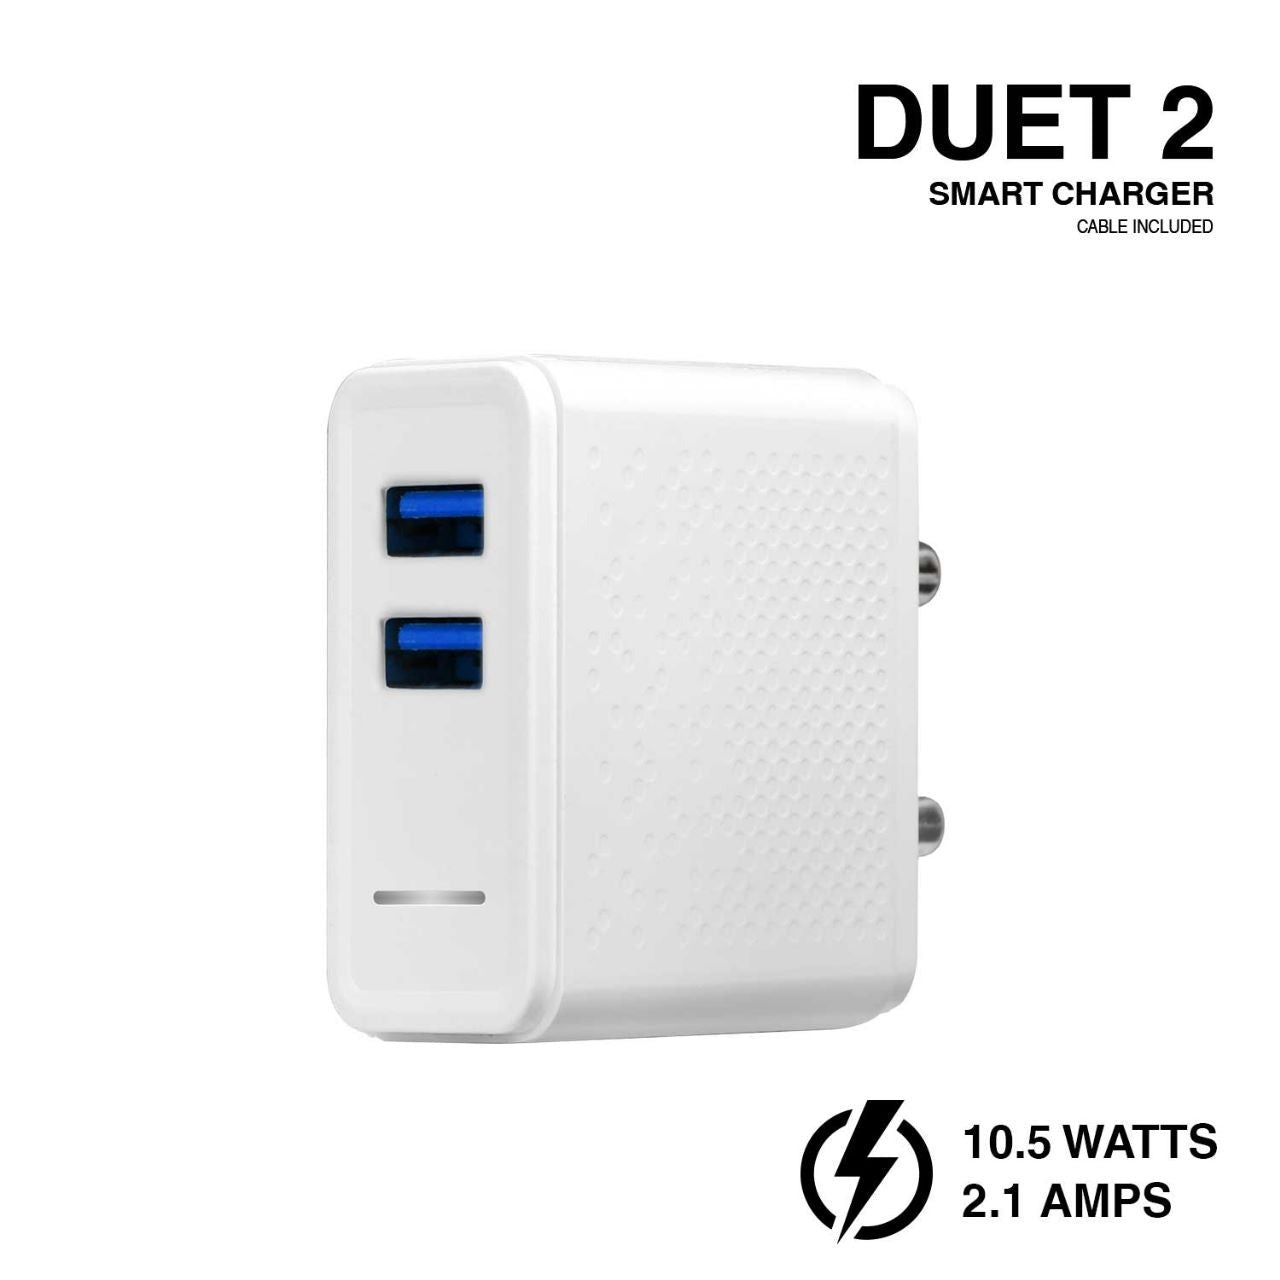 MOBILE CHARGER DUET 2 (2.4 AMP)WITH LIGHTNING CABLE ( LIGHTNING CABLE INCLUDED) (WHITE)